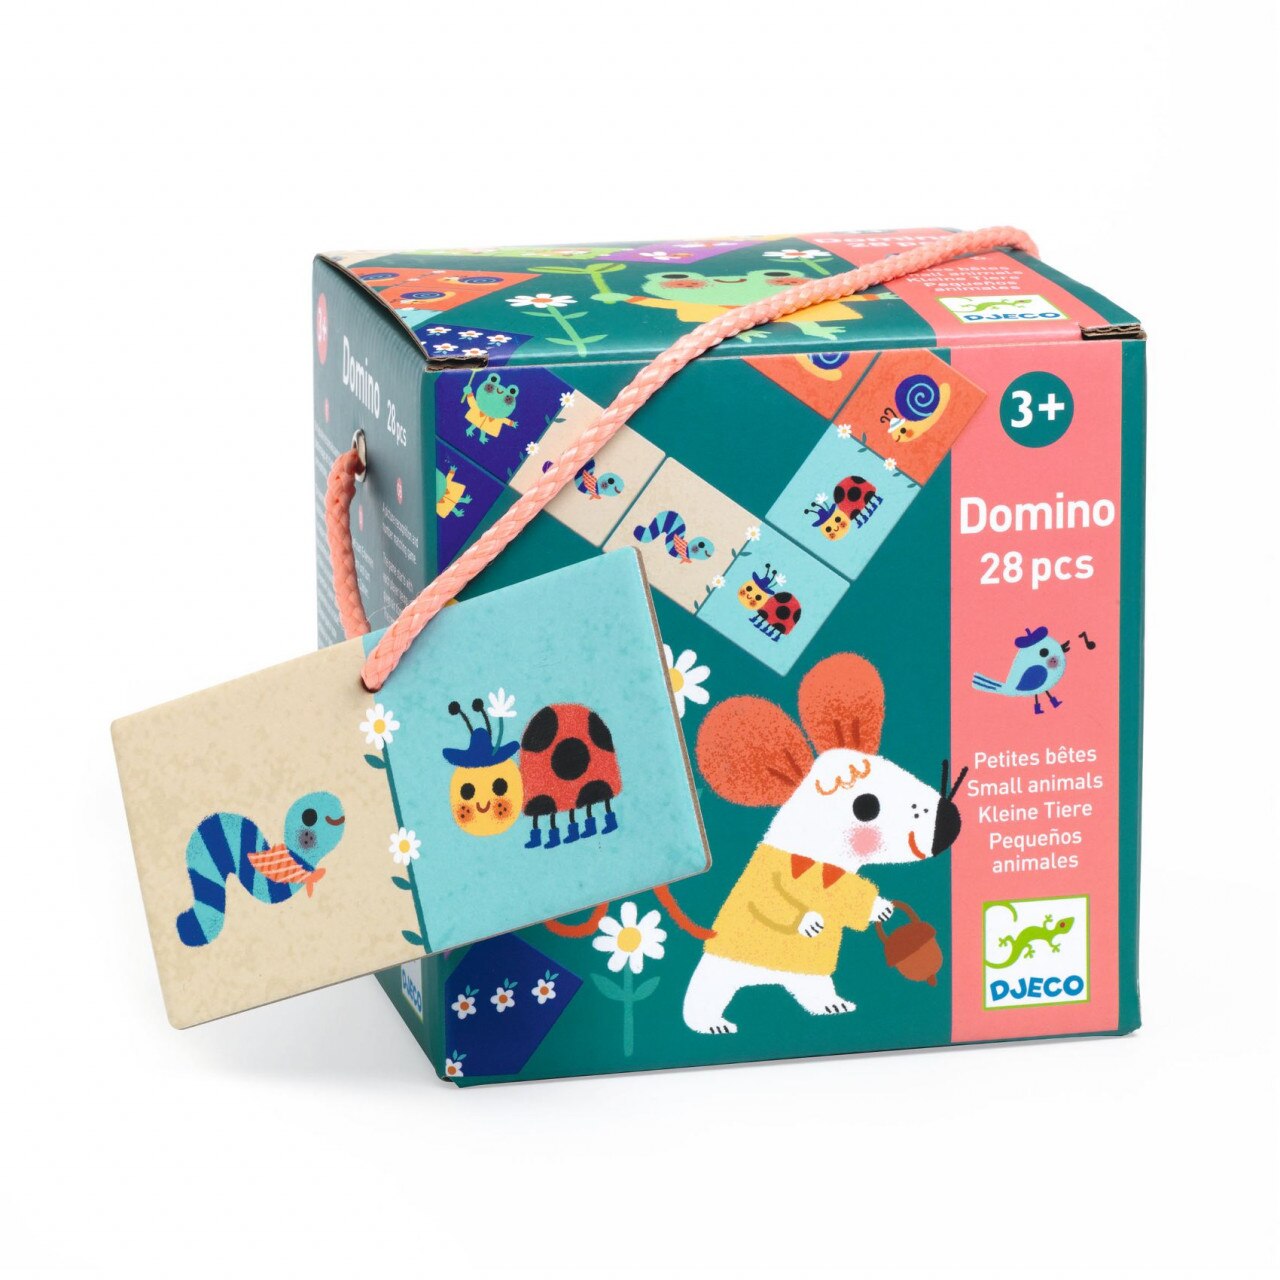 Puzzle cubes Animoroll - Djeco +2 ans